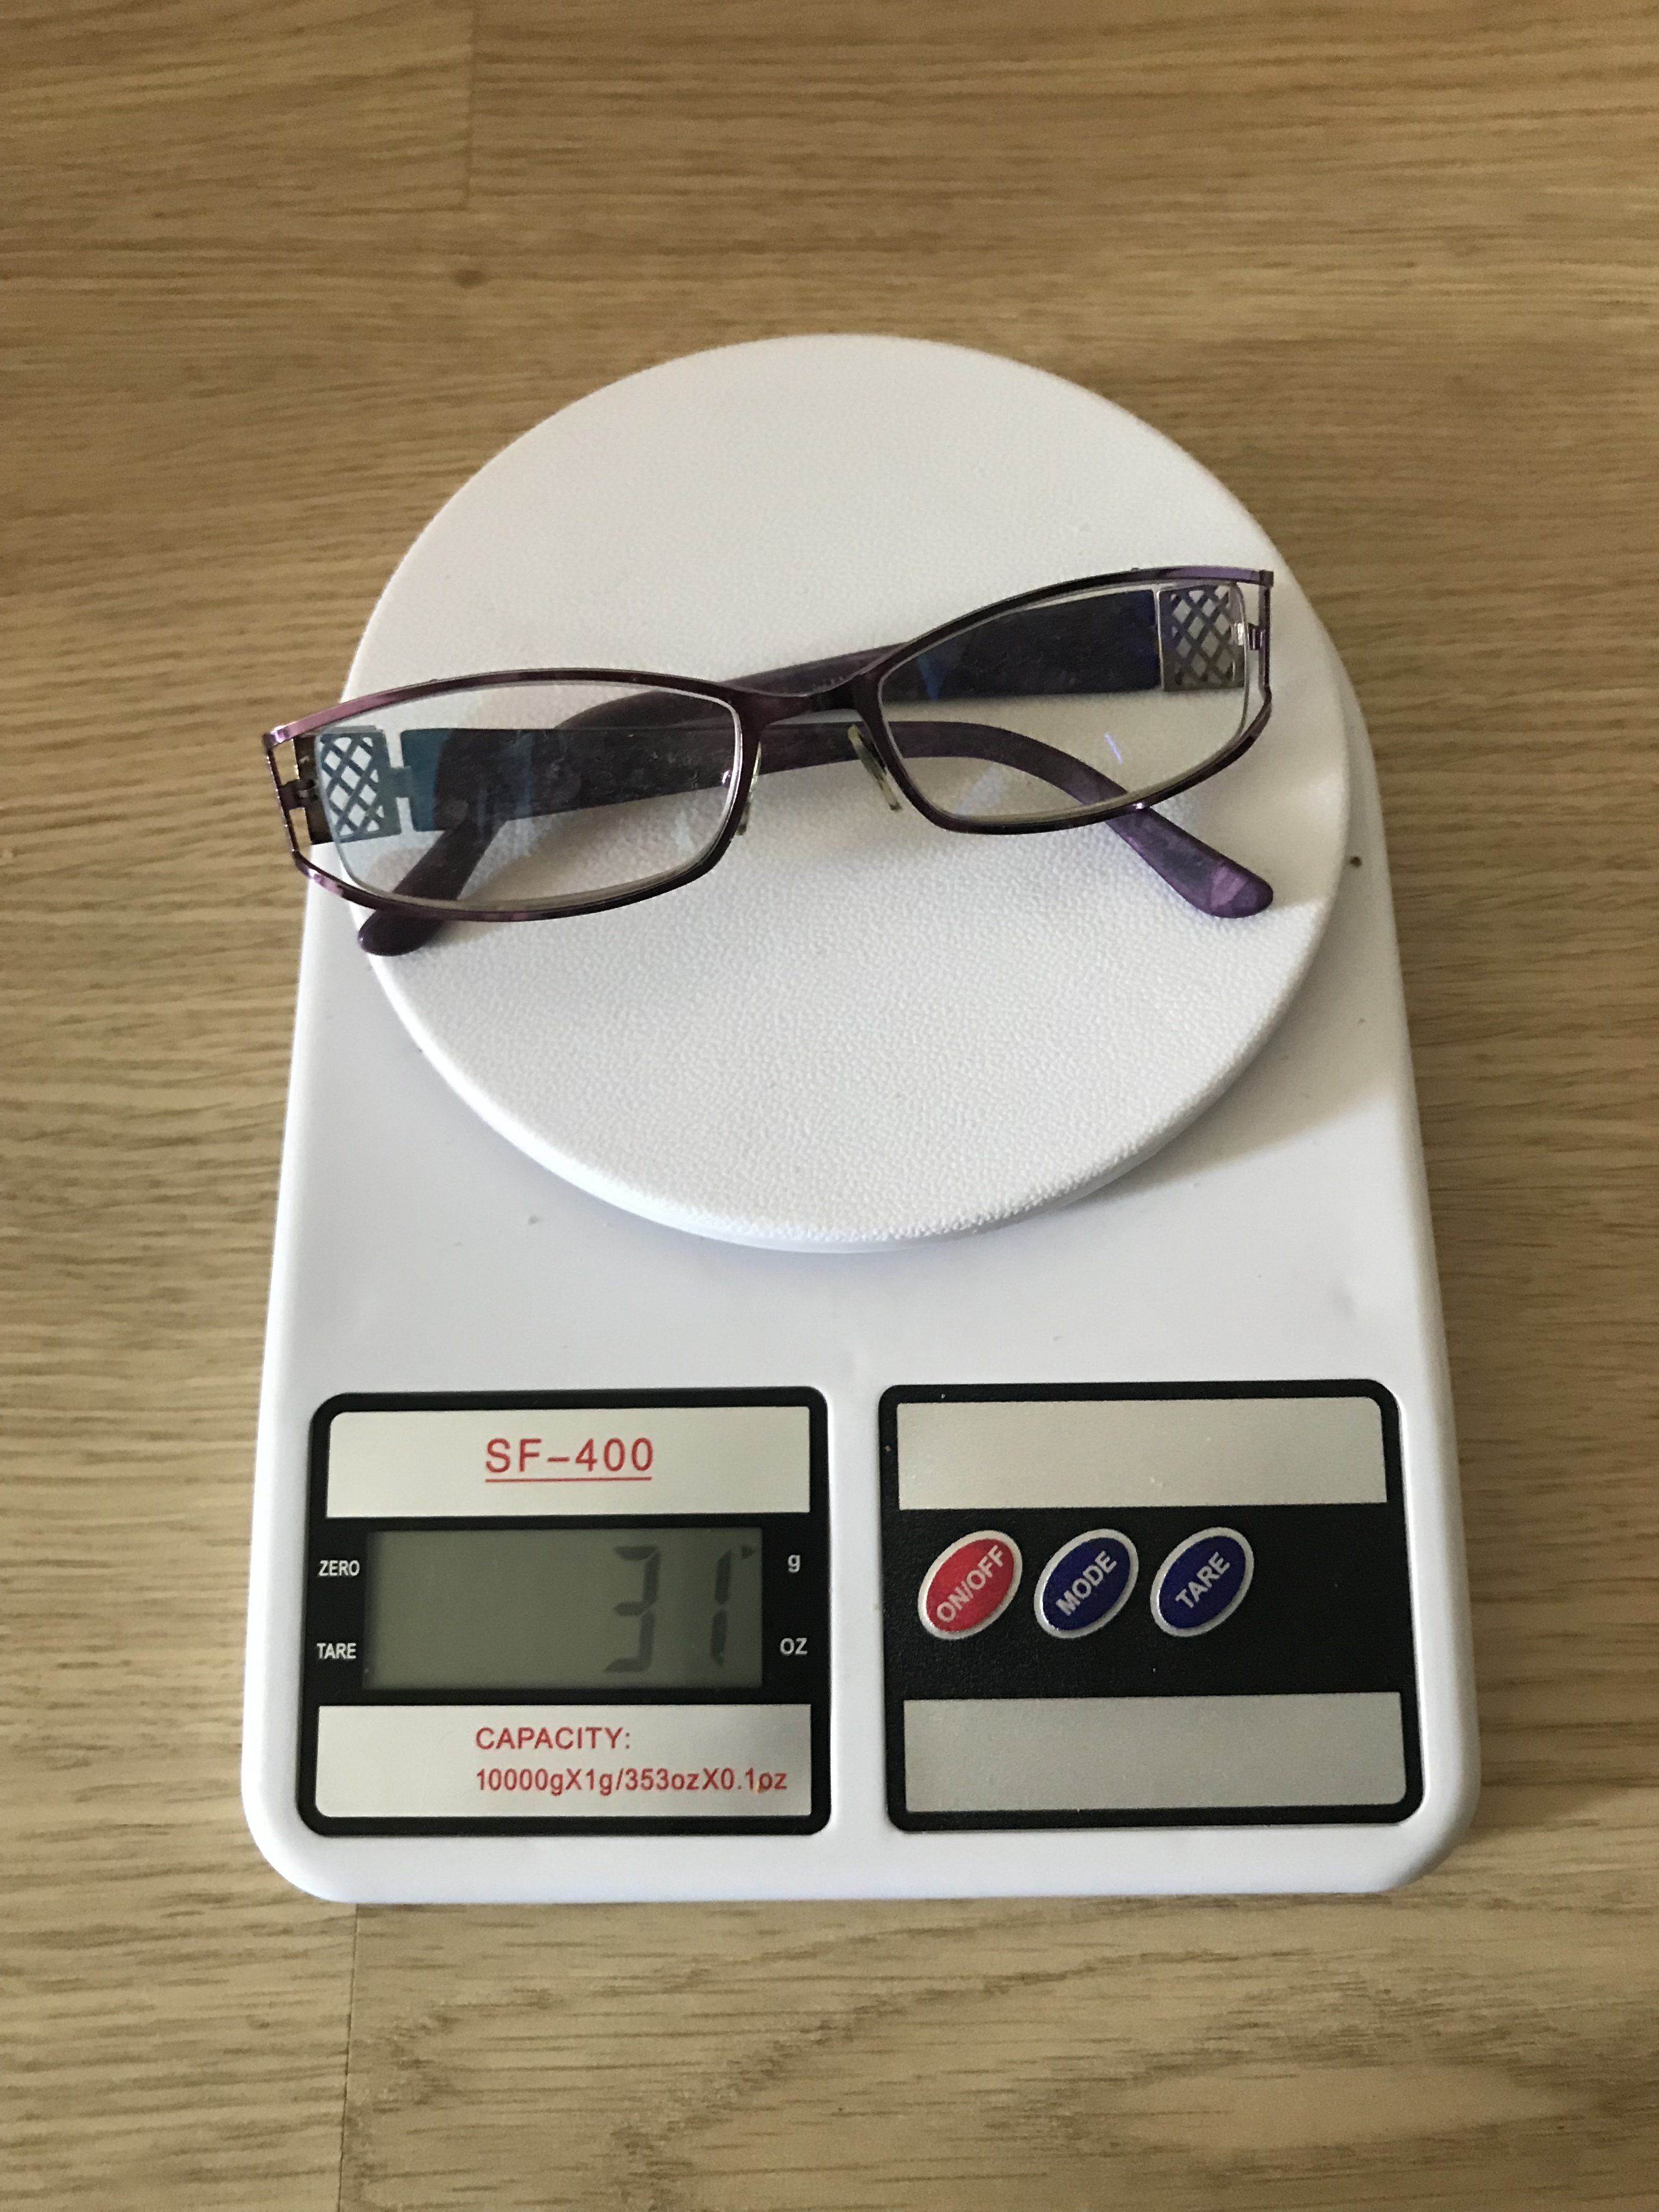 How much do eyeglasses weigh?